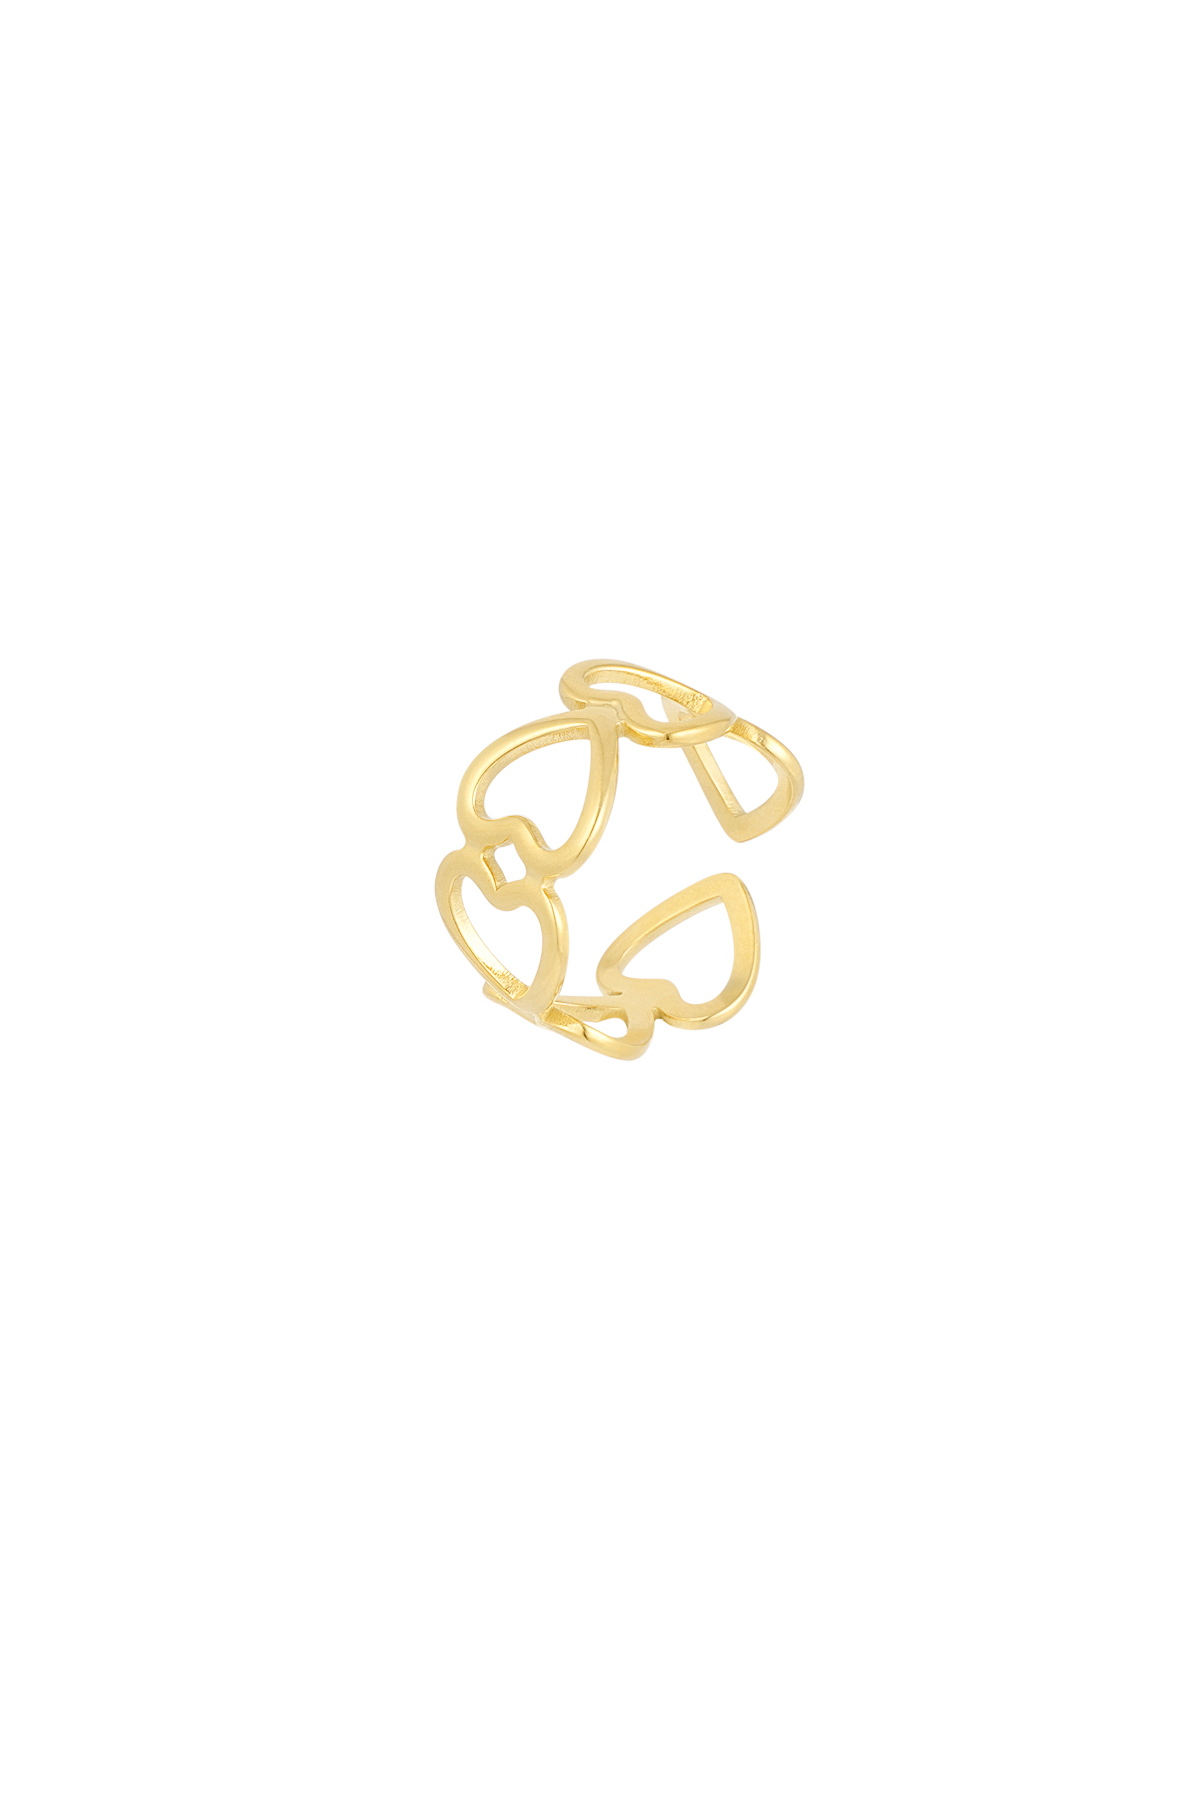 Ring heart connected - gold Picture4